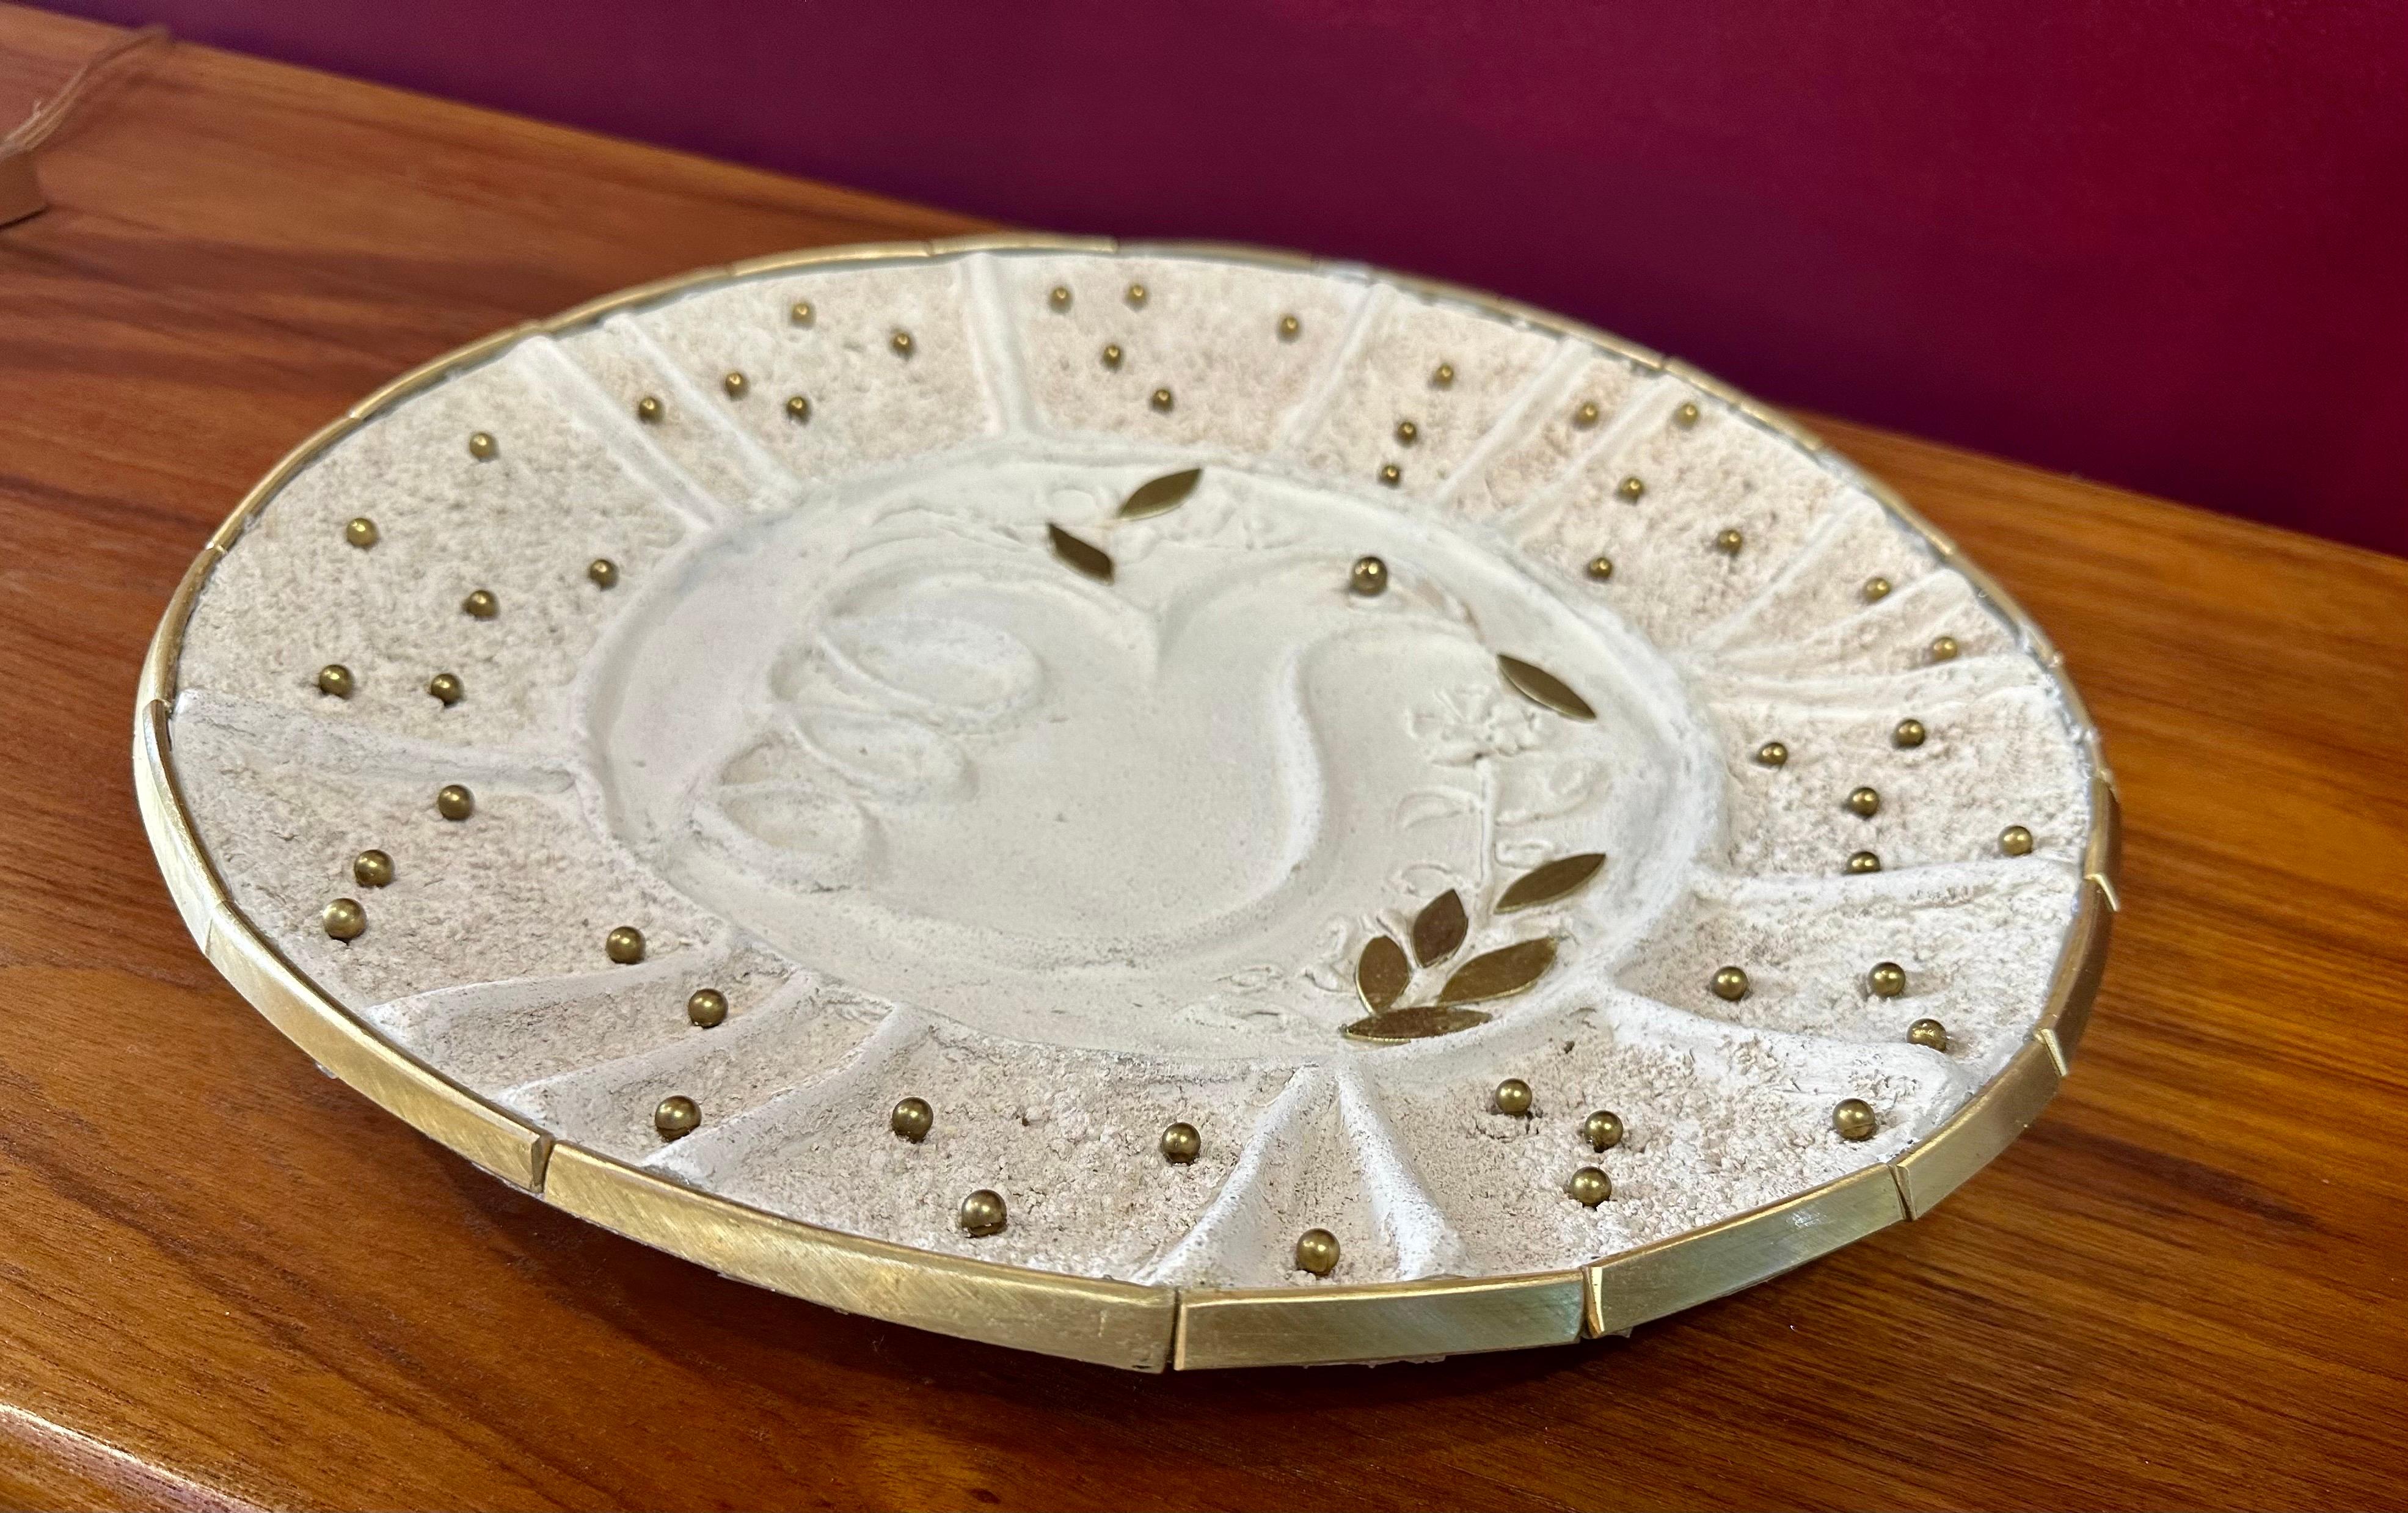 Handmade Sculptural Mid-Century Modern Platter of Bronze and Ceramic, a One of a Kind Piece, Signed